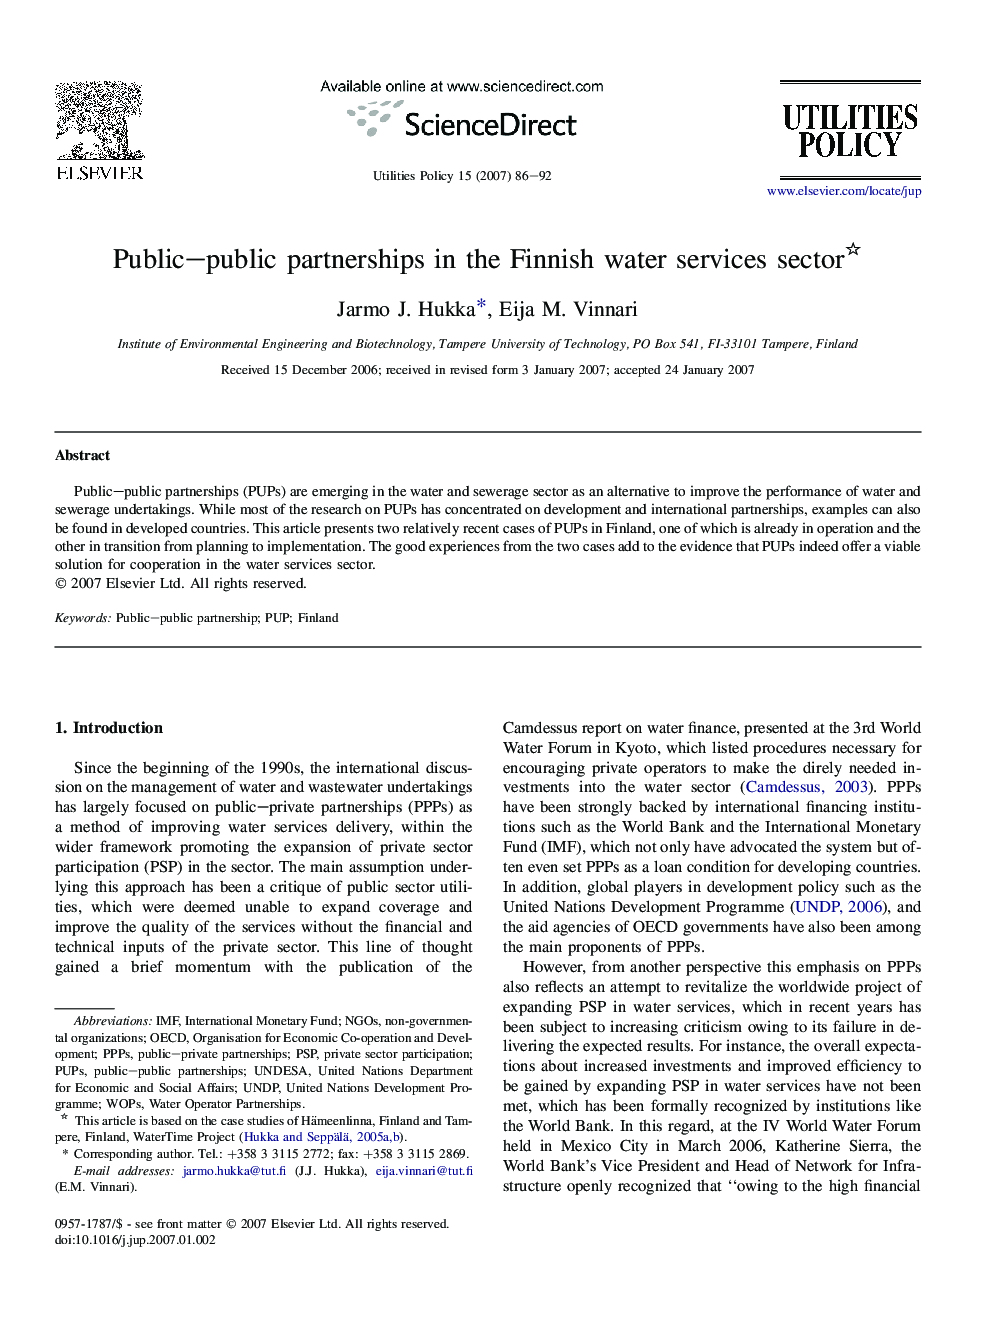 Public–public partnerships in the Finnish water services sector 